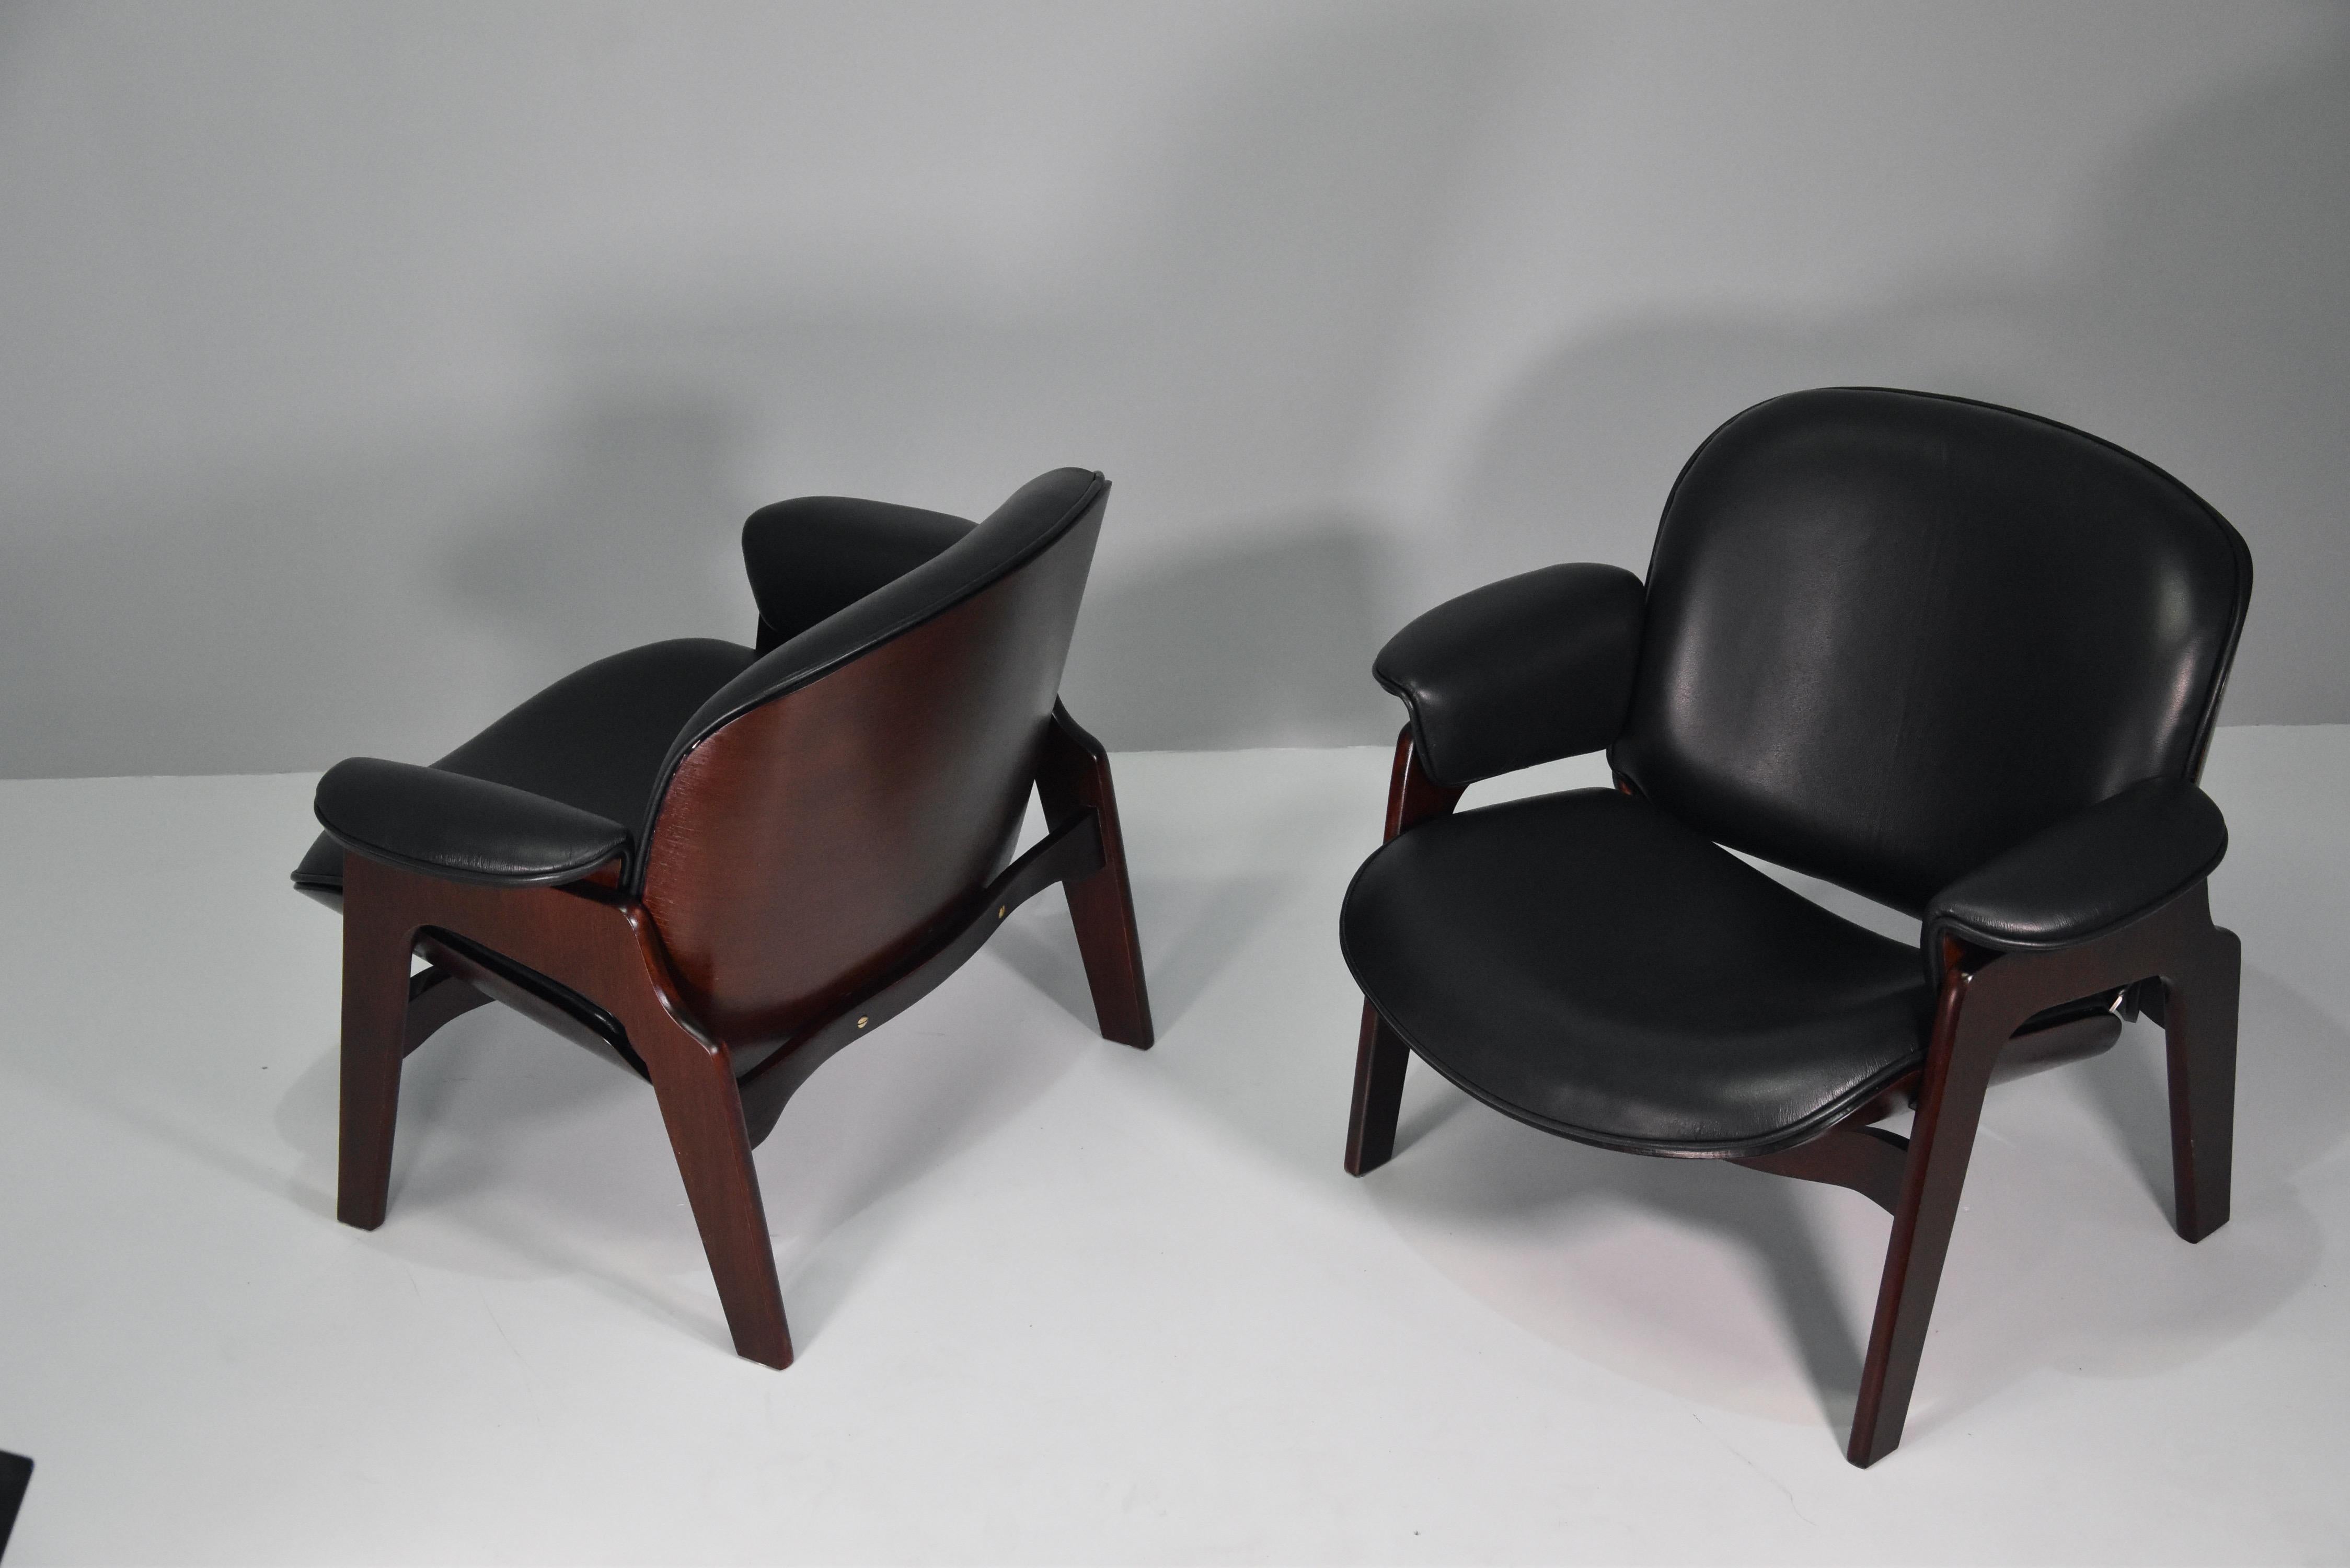 Italian Mid-Century Modern design set of two armchairs designed by Ico Parisi fo Mim Roma with wooden frame and curved plywood, leather upholstery, 1960s.